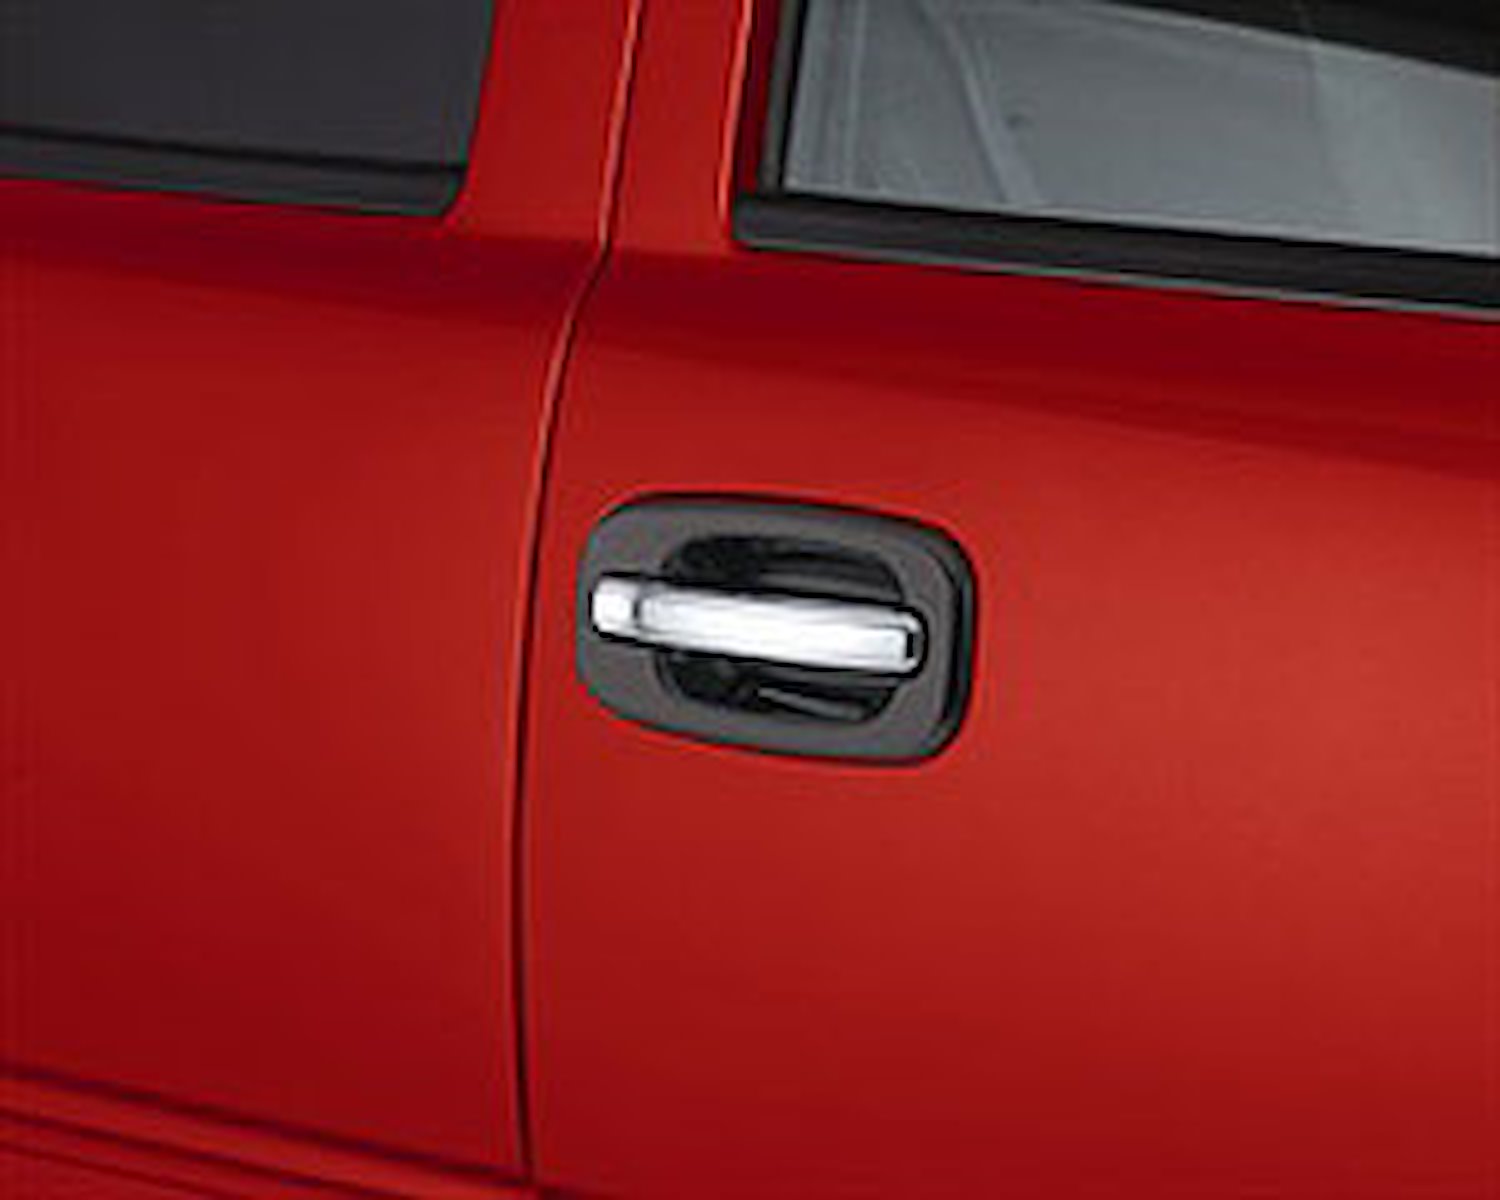 Chrome Door Lever Covers 2004-2013 F150 Pickup